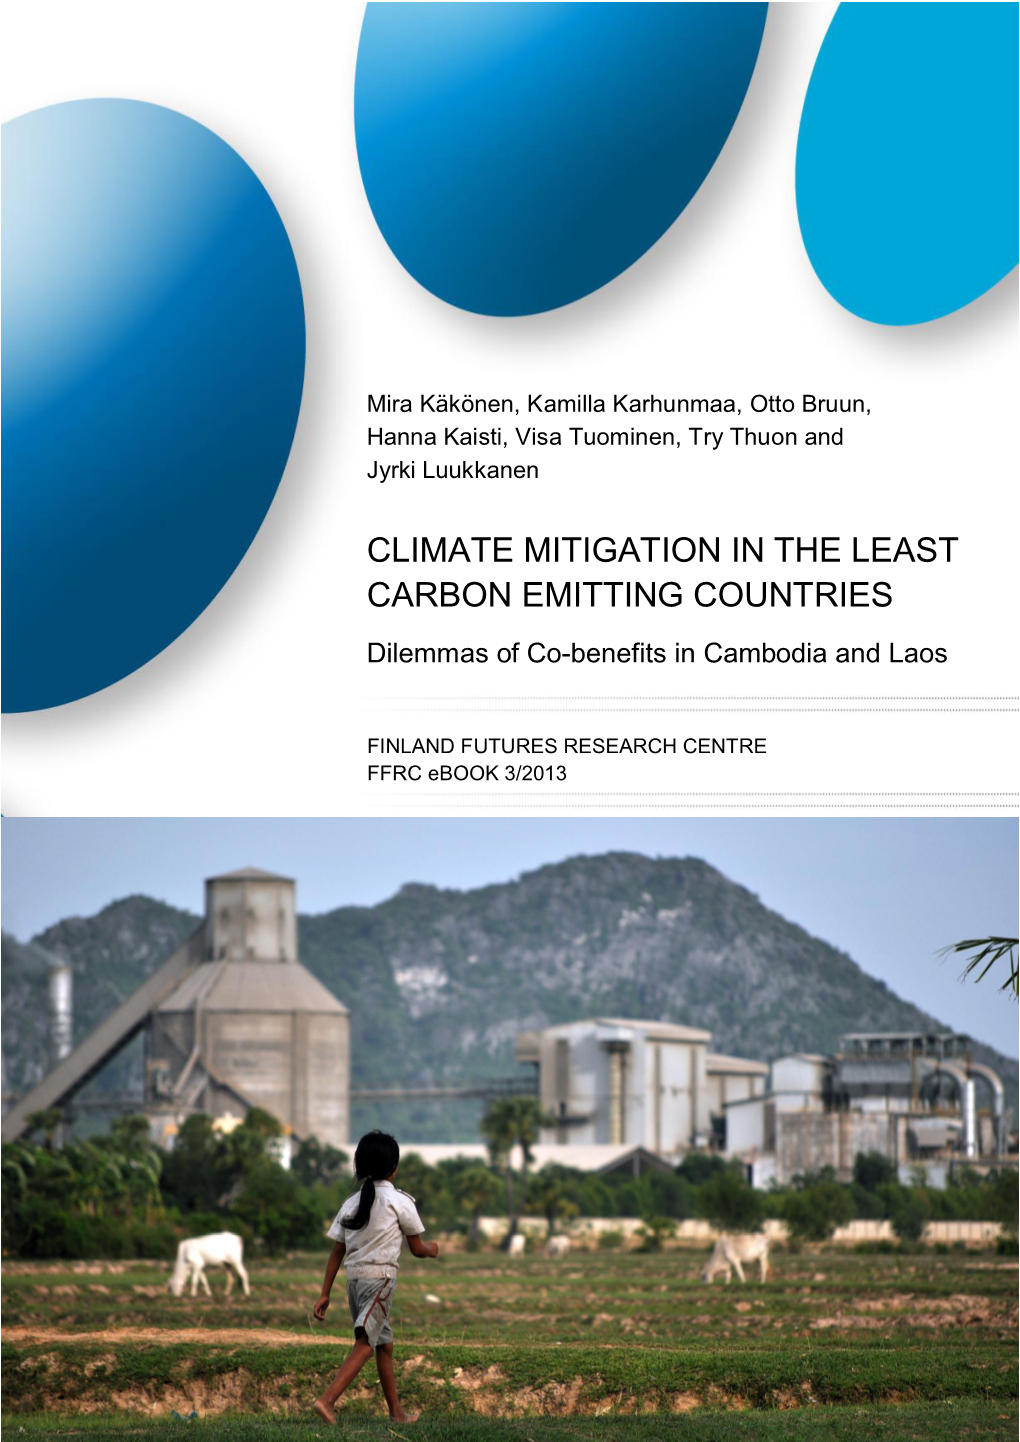 CLIMATE MITIGATION in the LEAST CARBON EMITTING COUNTRIES Dilemmas of Co-Benefits in Cambodia and Laos